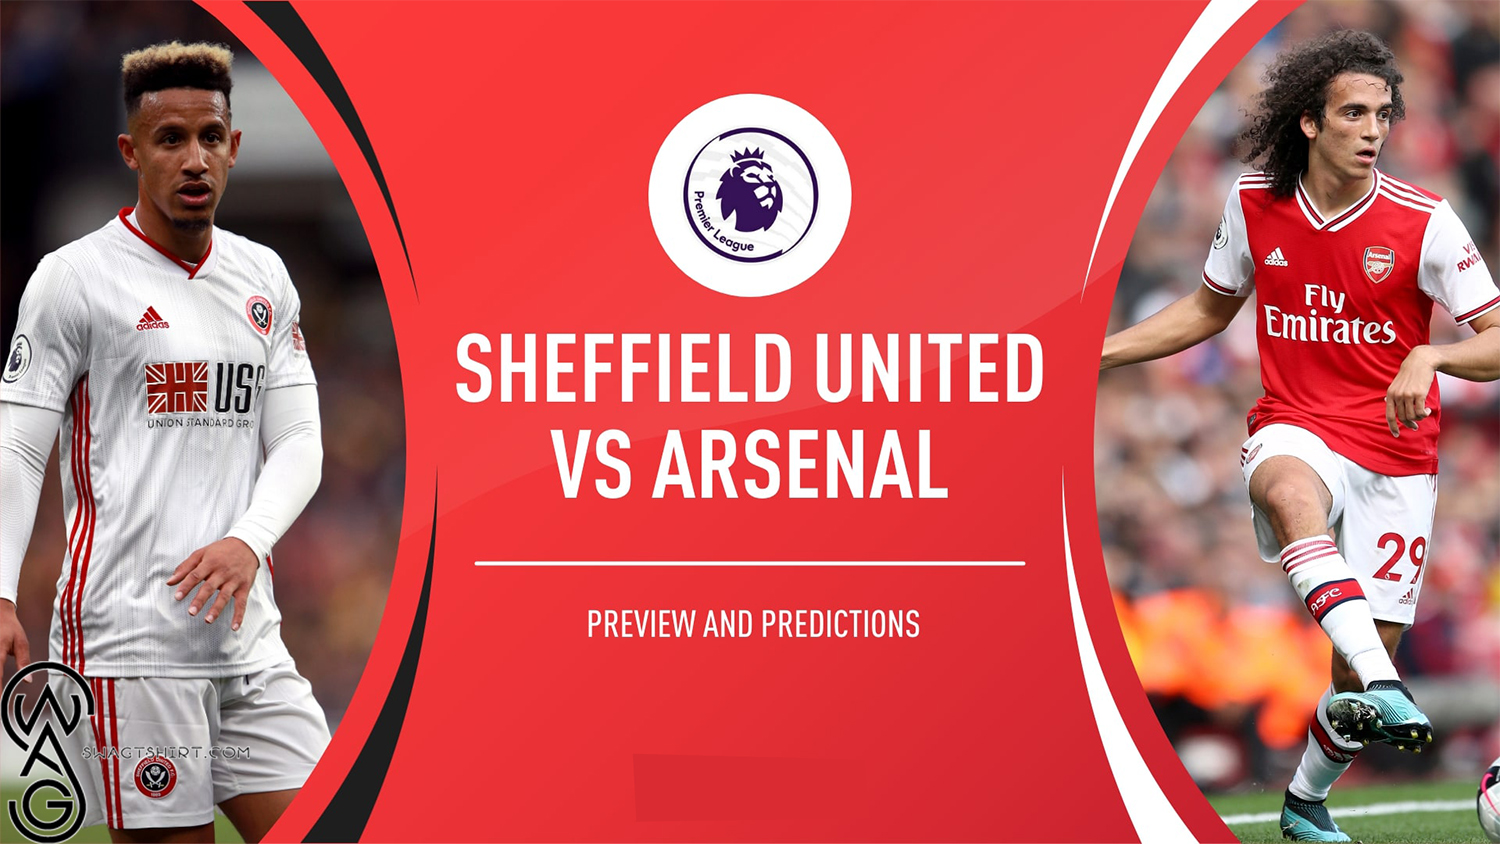 Steel Meets Style The Bramall Lane Battle Between Sheffield United and Arsenal